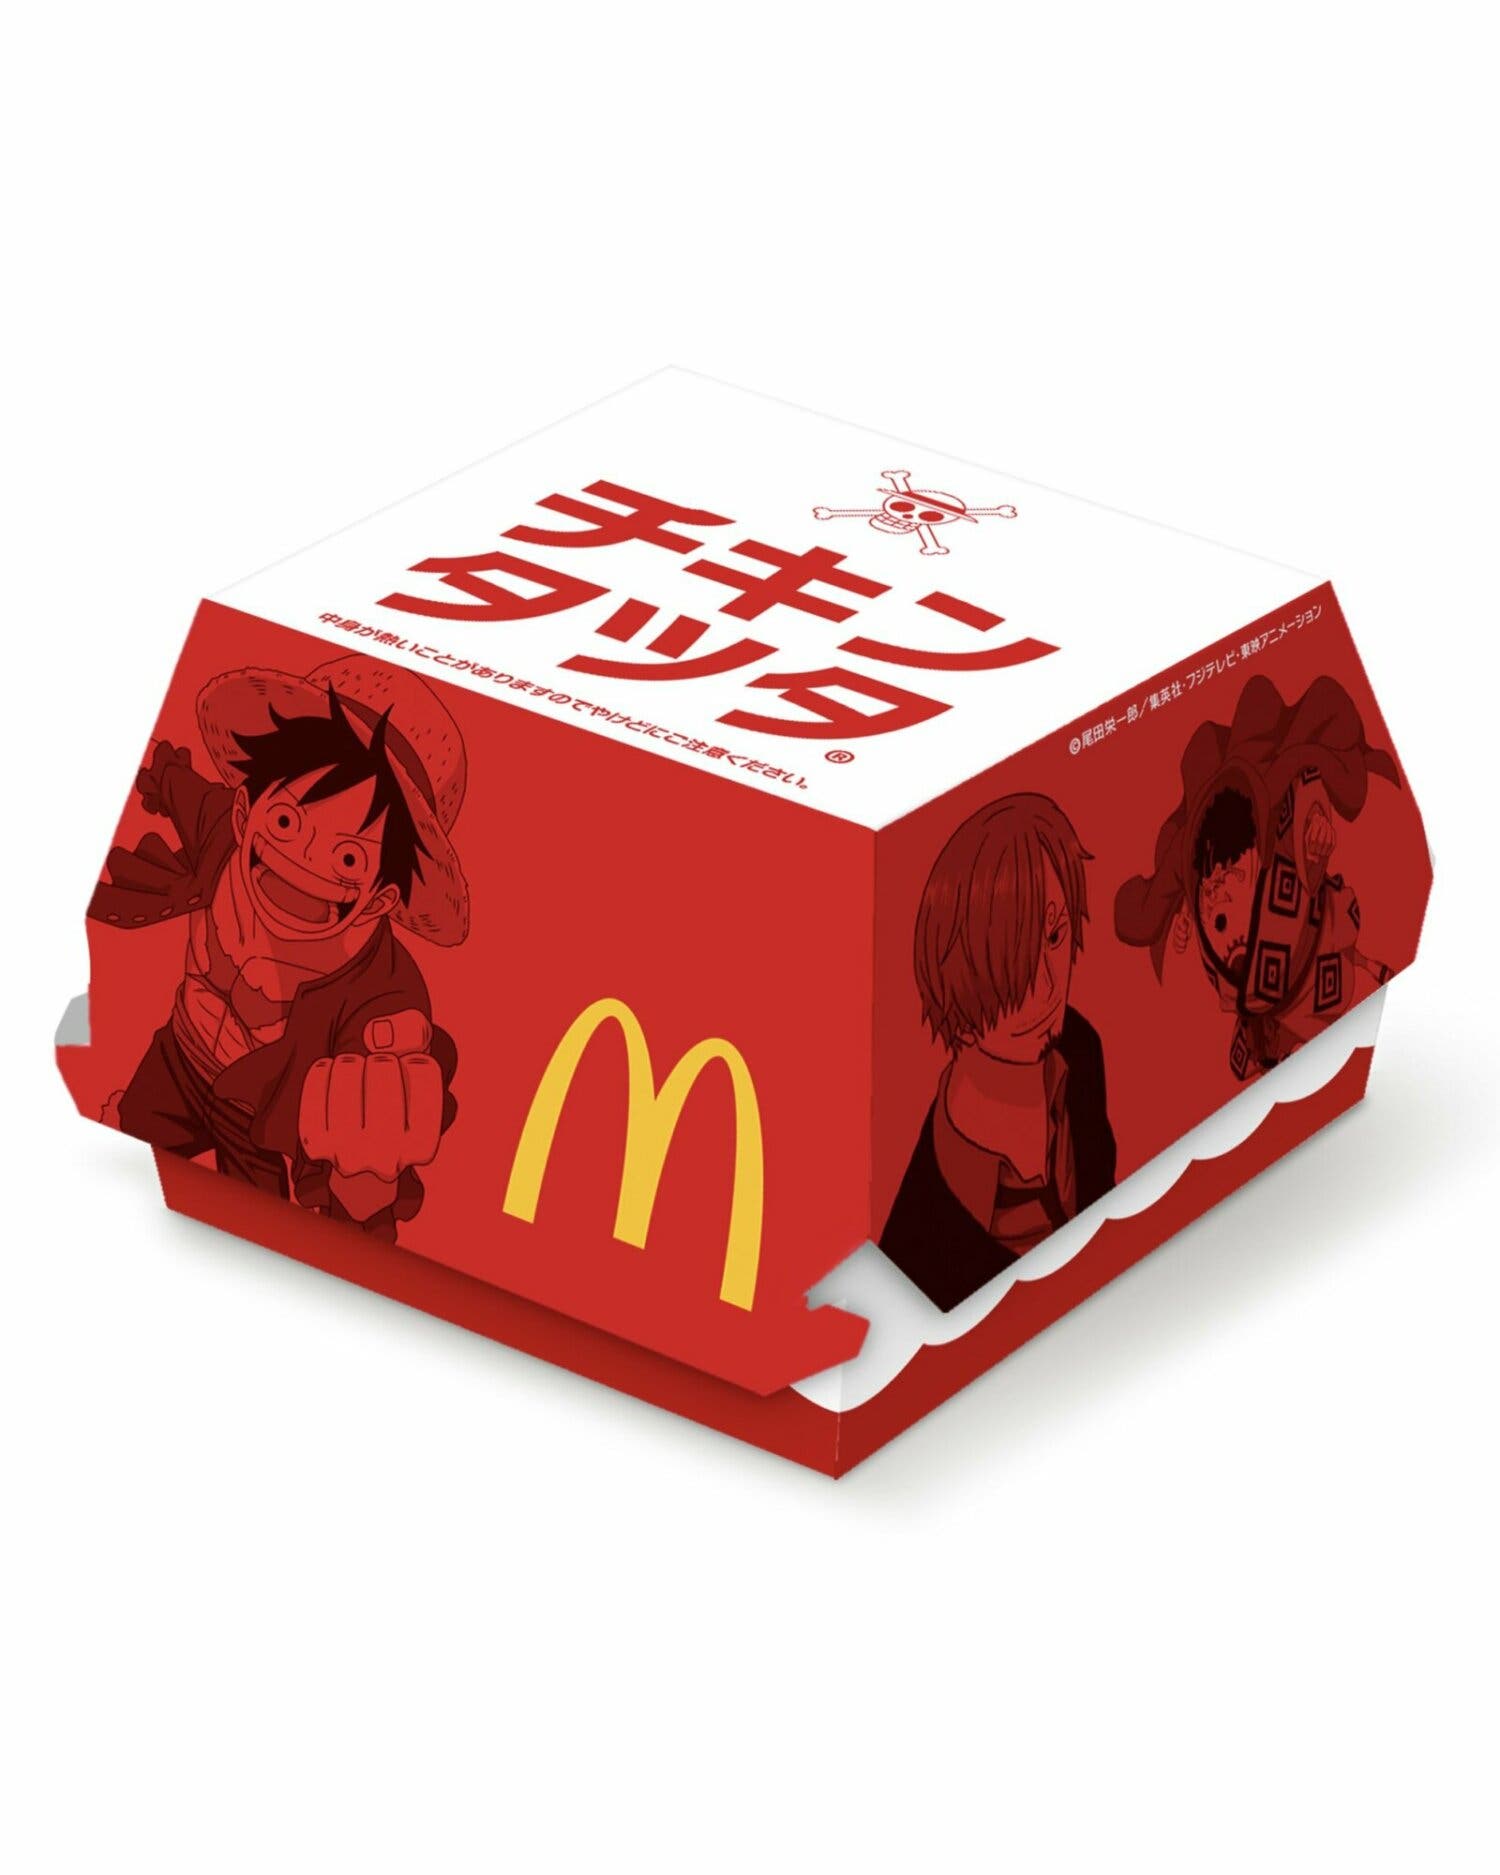 One Piece Here Are The Special Boxes For McDonald's Hamburgers